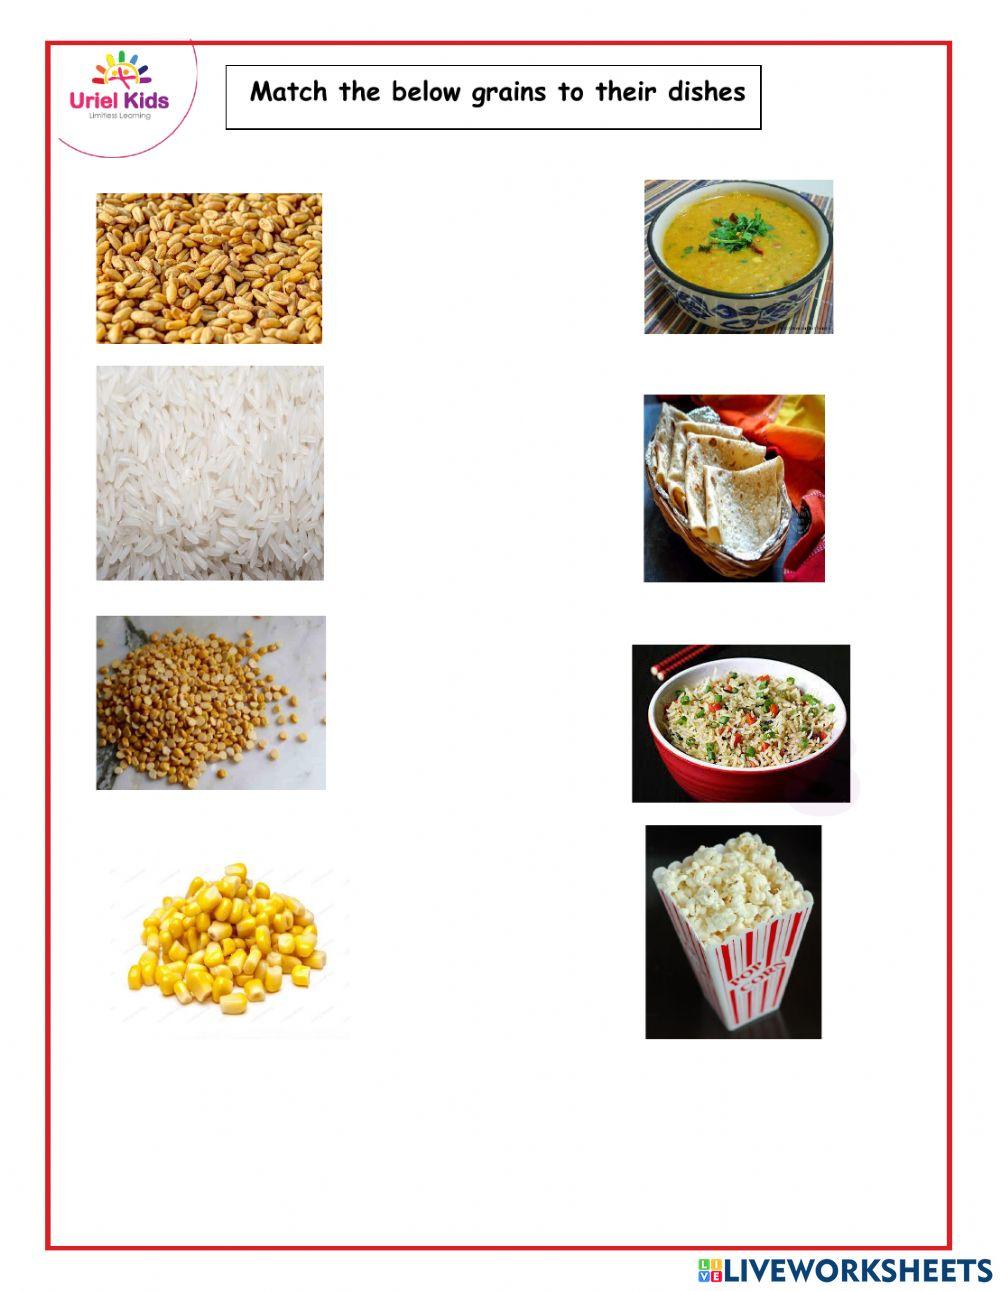 Match the grains to their dishes